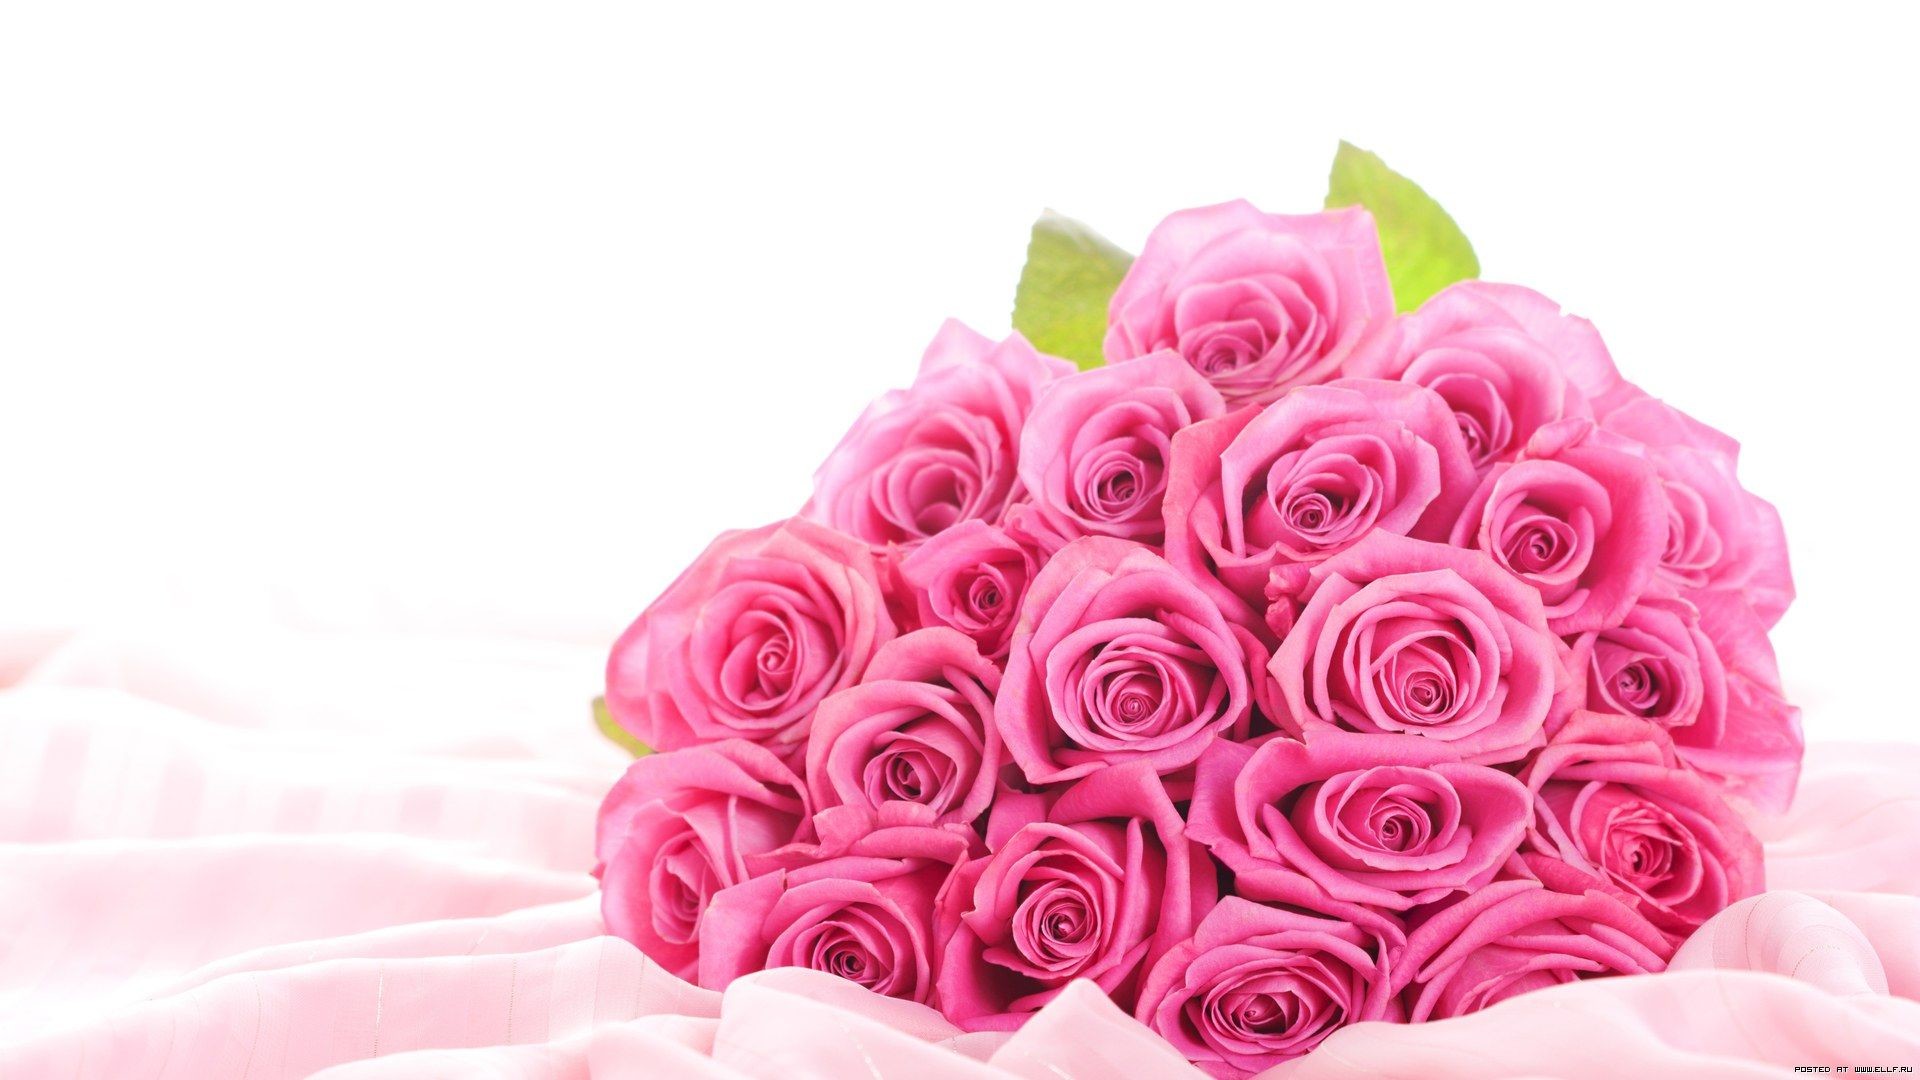 1920x1080 Rose Flowers Images Collection 1600Ã1000 Rose Flower Wallpaper (56  Wallpapers) | Adorable